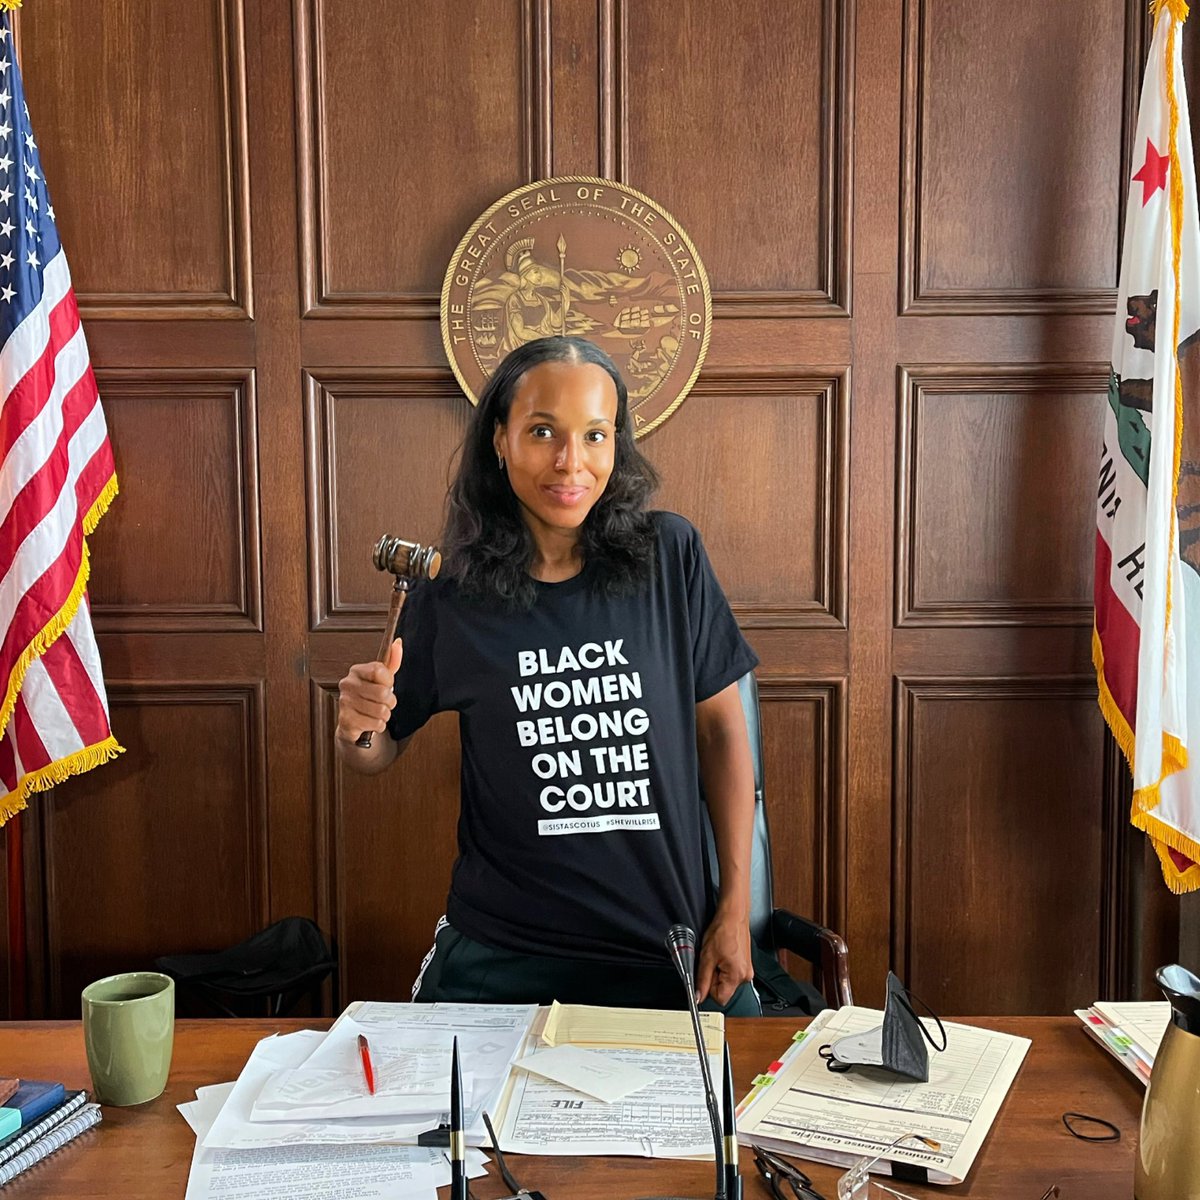 I know it’s #MarchMadess 🏀 but let’s talk about a different kind of court 👩🏾‍⚖️. The SUPREME Court.  #KetanjiBrownJackson is out here making HISTORY ya’ll. Showing Black girls they belong in ALL rooms where decisions are made. #BackJackson #SheWillRise